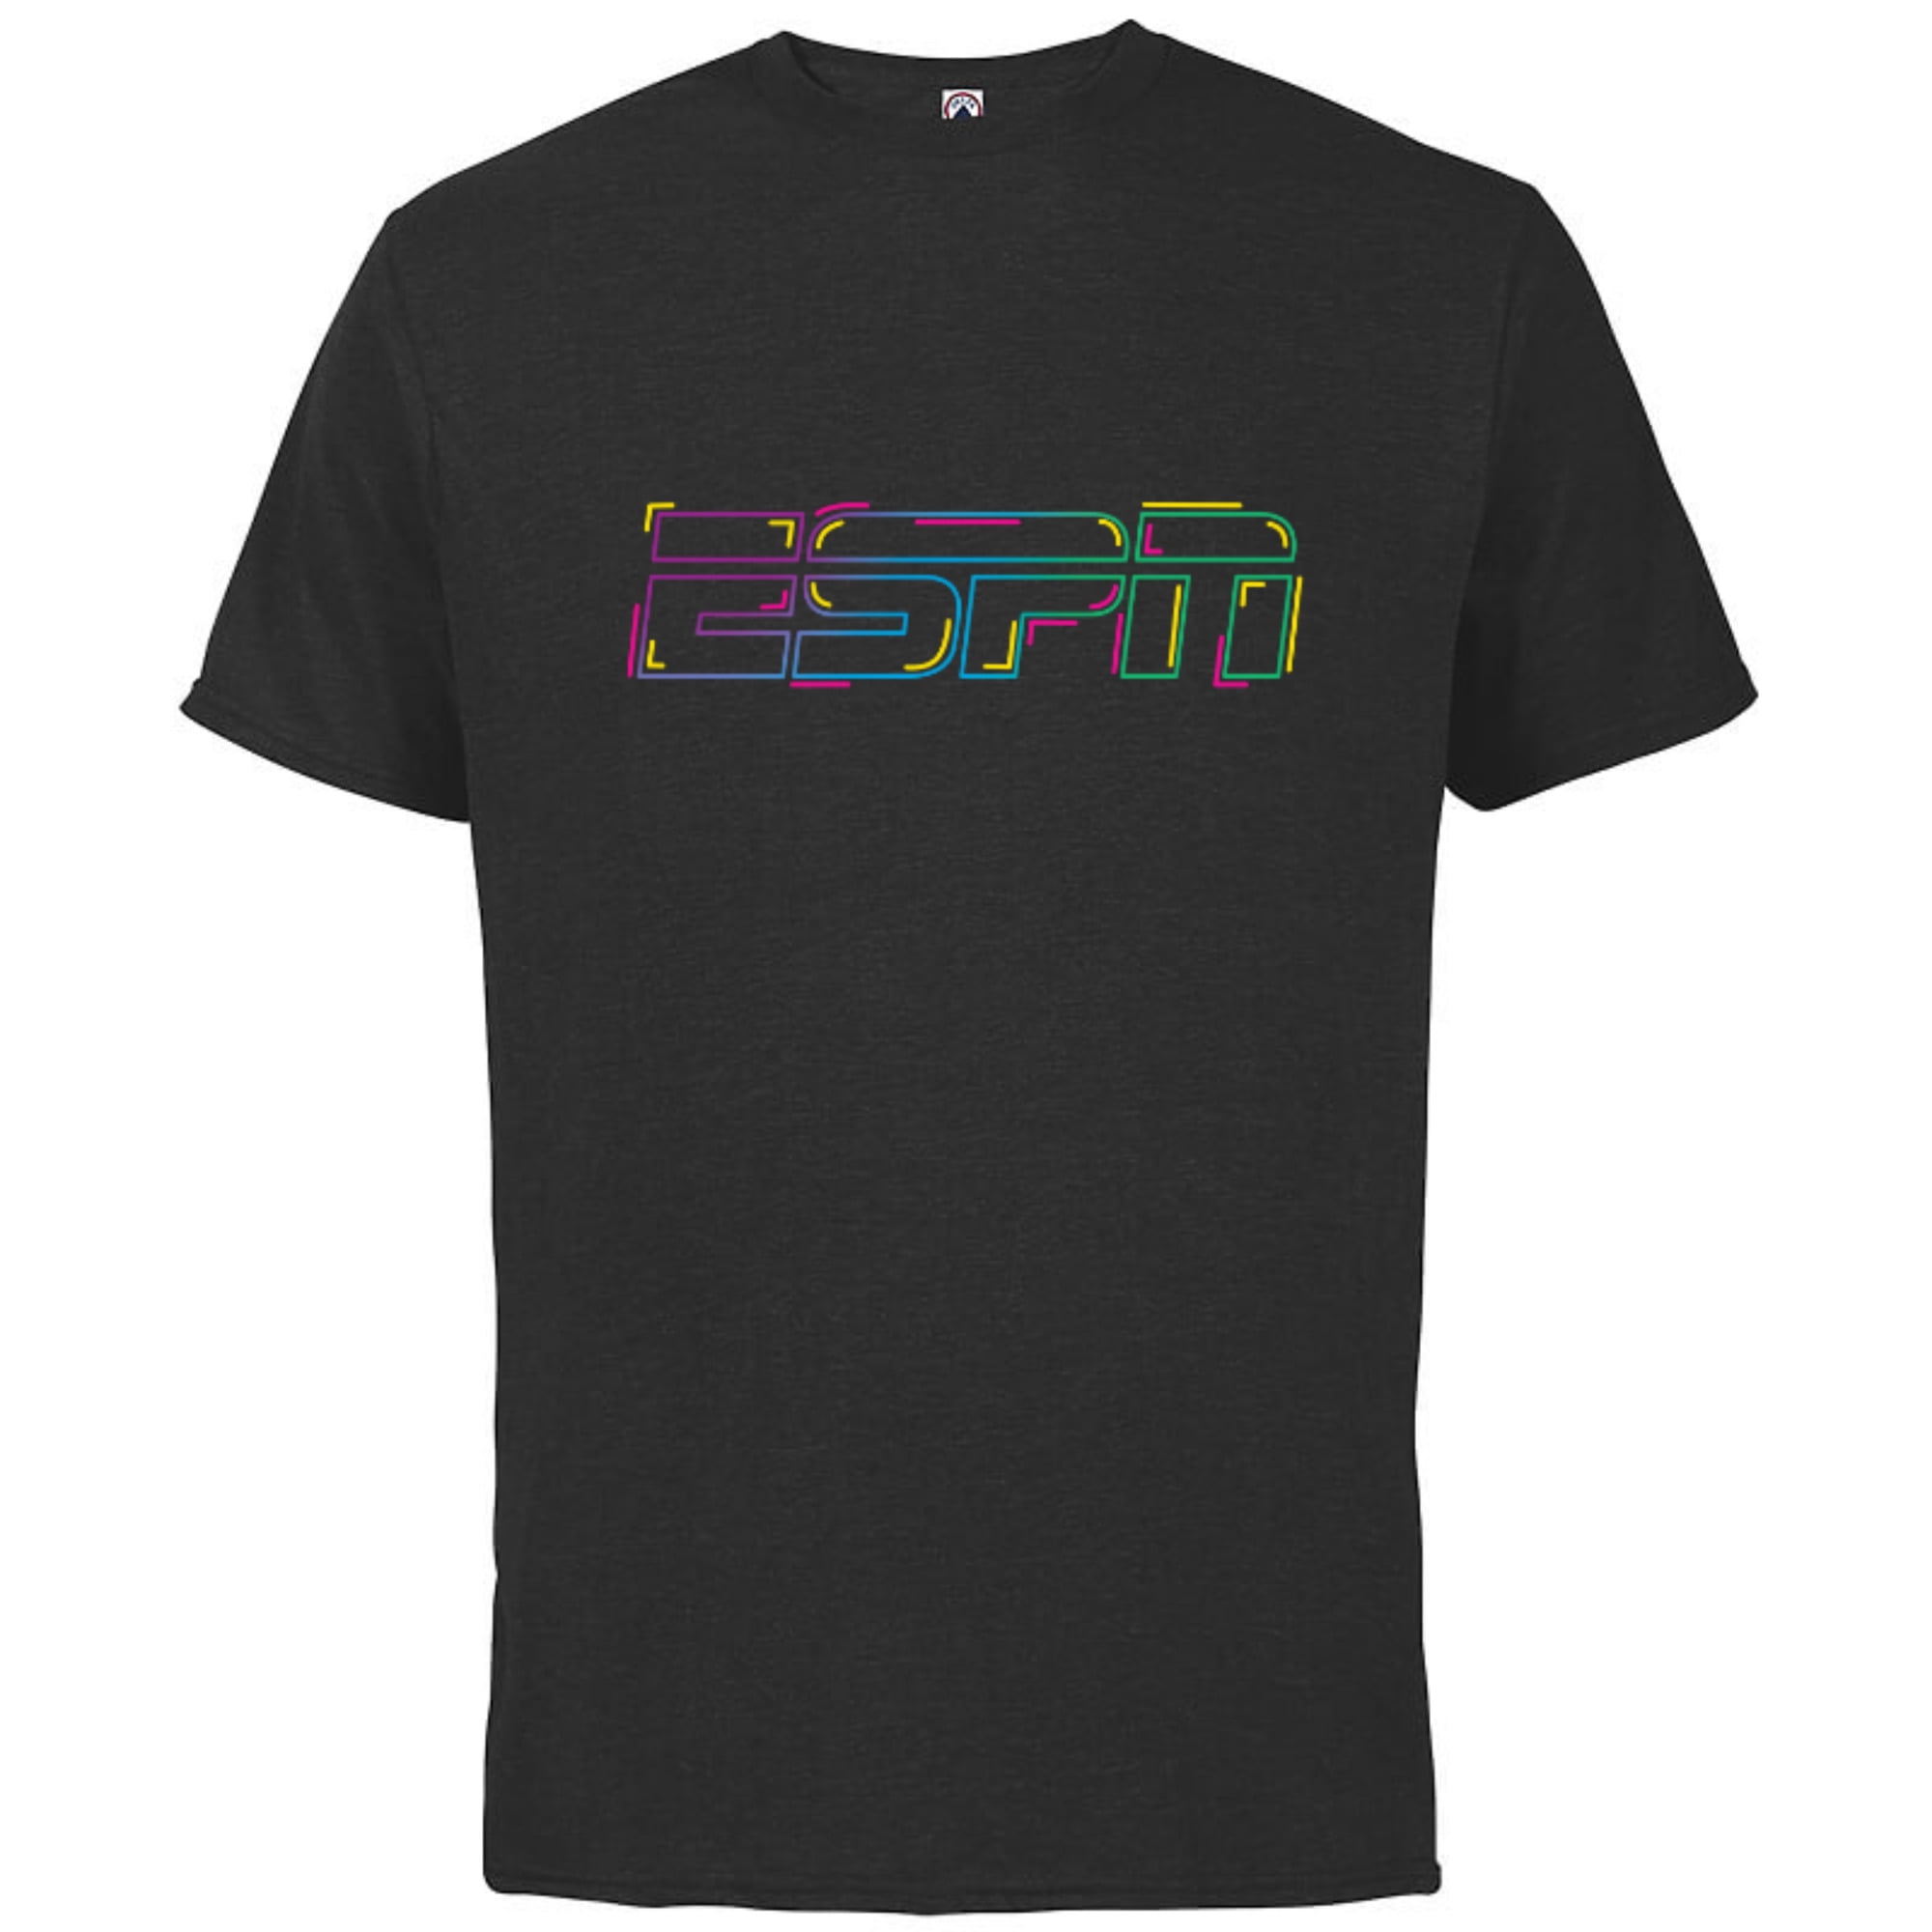 ESPN Logo Colorful Outline Standard - Short Sleeve Cotton T-Shirt for Adults - Customized-Black